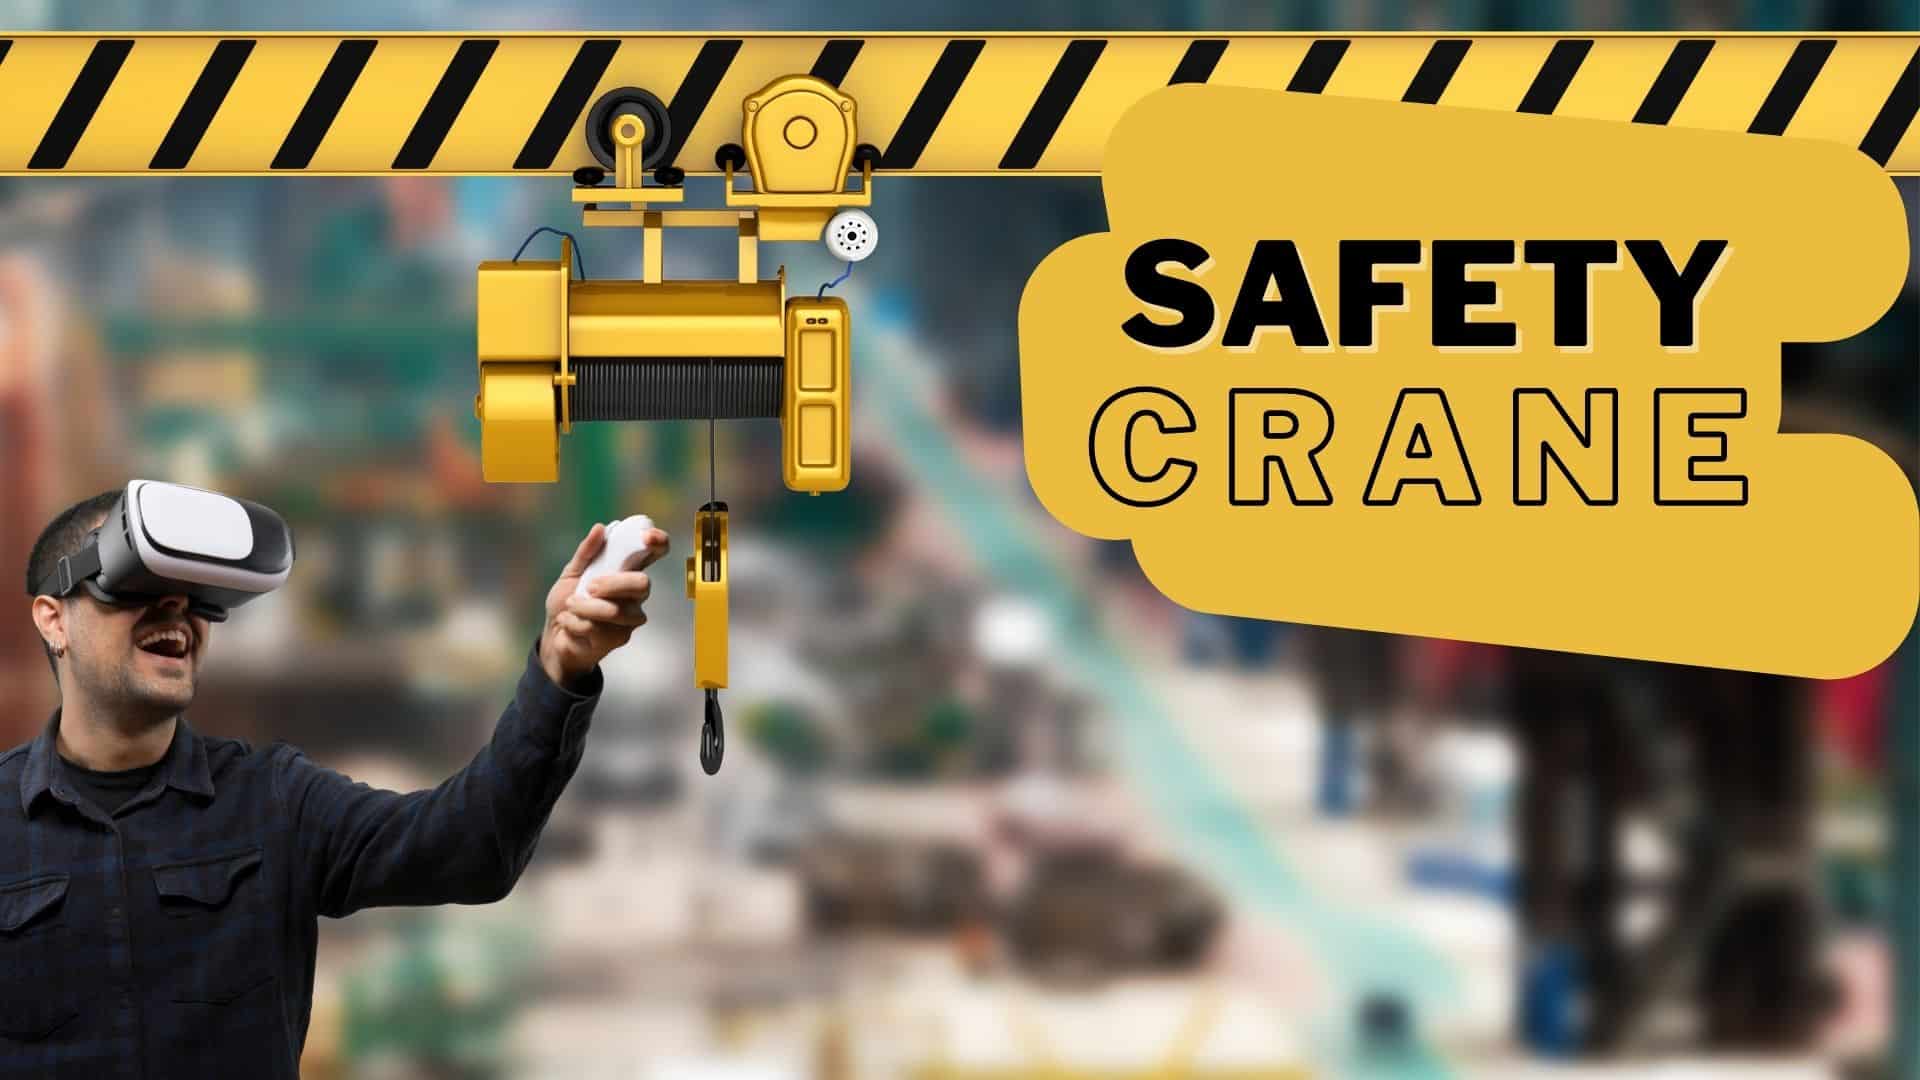 https://www.come-in-vr.com/wp-content/uploads/2021/11/Safety-Crane-Pont-Roulant-1.jpg